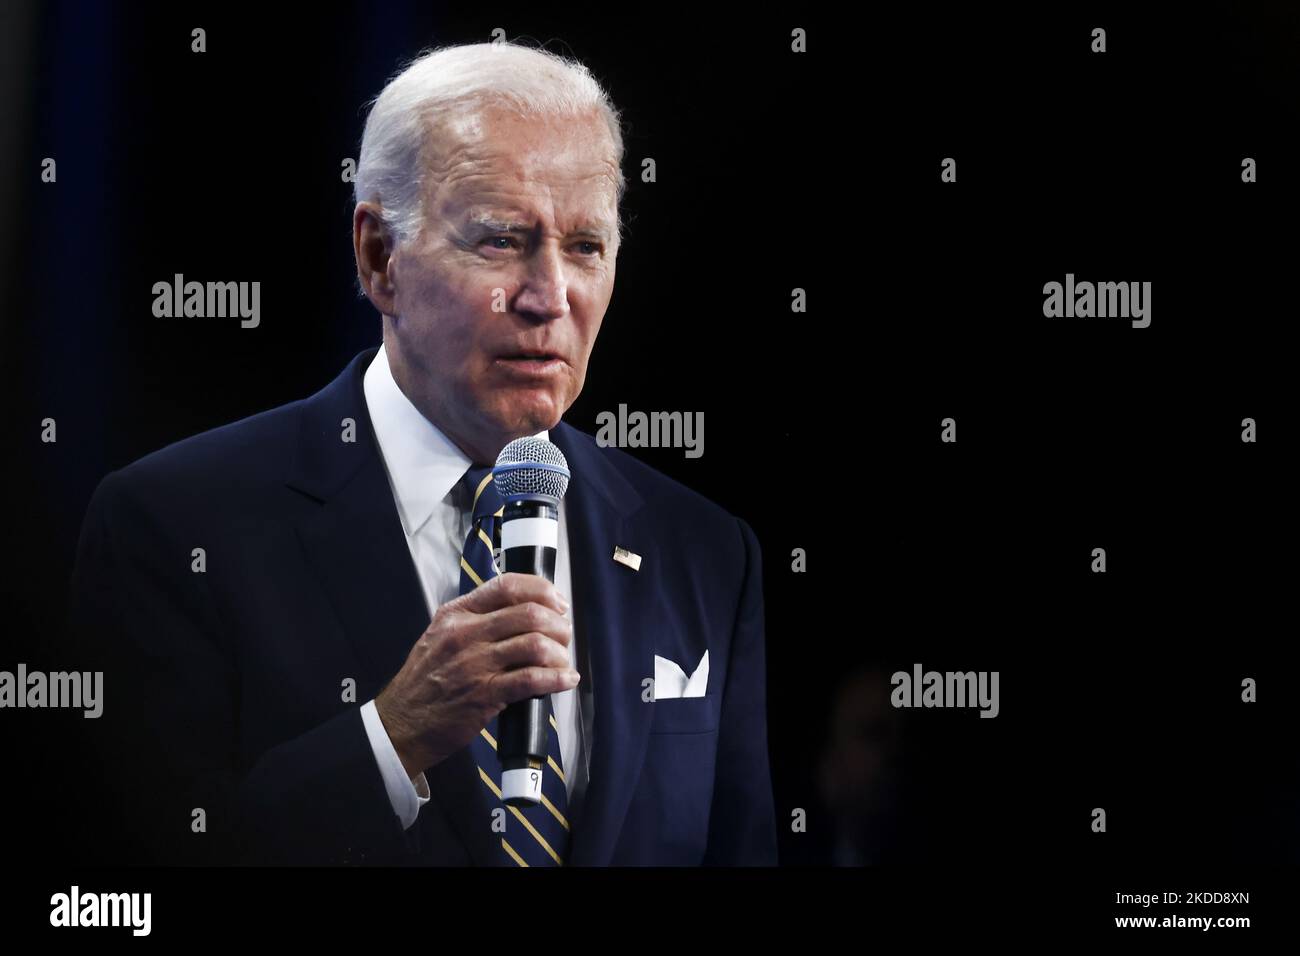 U.S. President Joe Biden is holding a press conference during the NATO Summit at the IFEMA congress centre in Madrid, Spain on June 30, 2022. (Photo by Beata Zawrzel/NurPhoto) Stock Photo